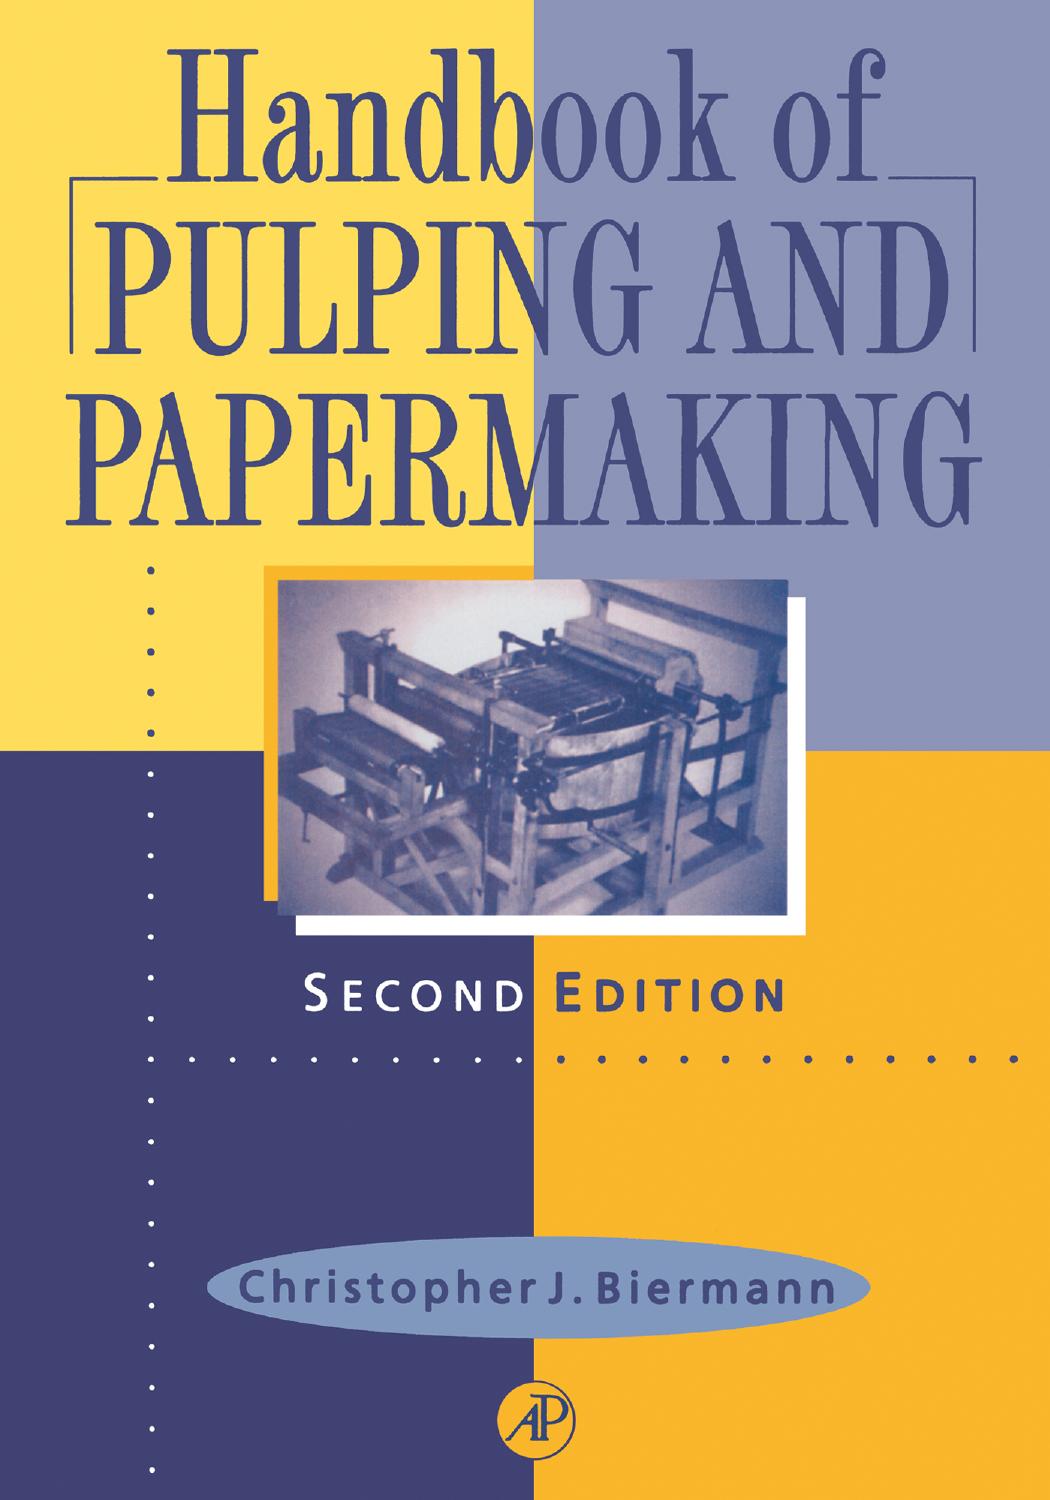 Handbook of Pulping and Papermaking, Second Edition 1996